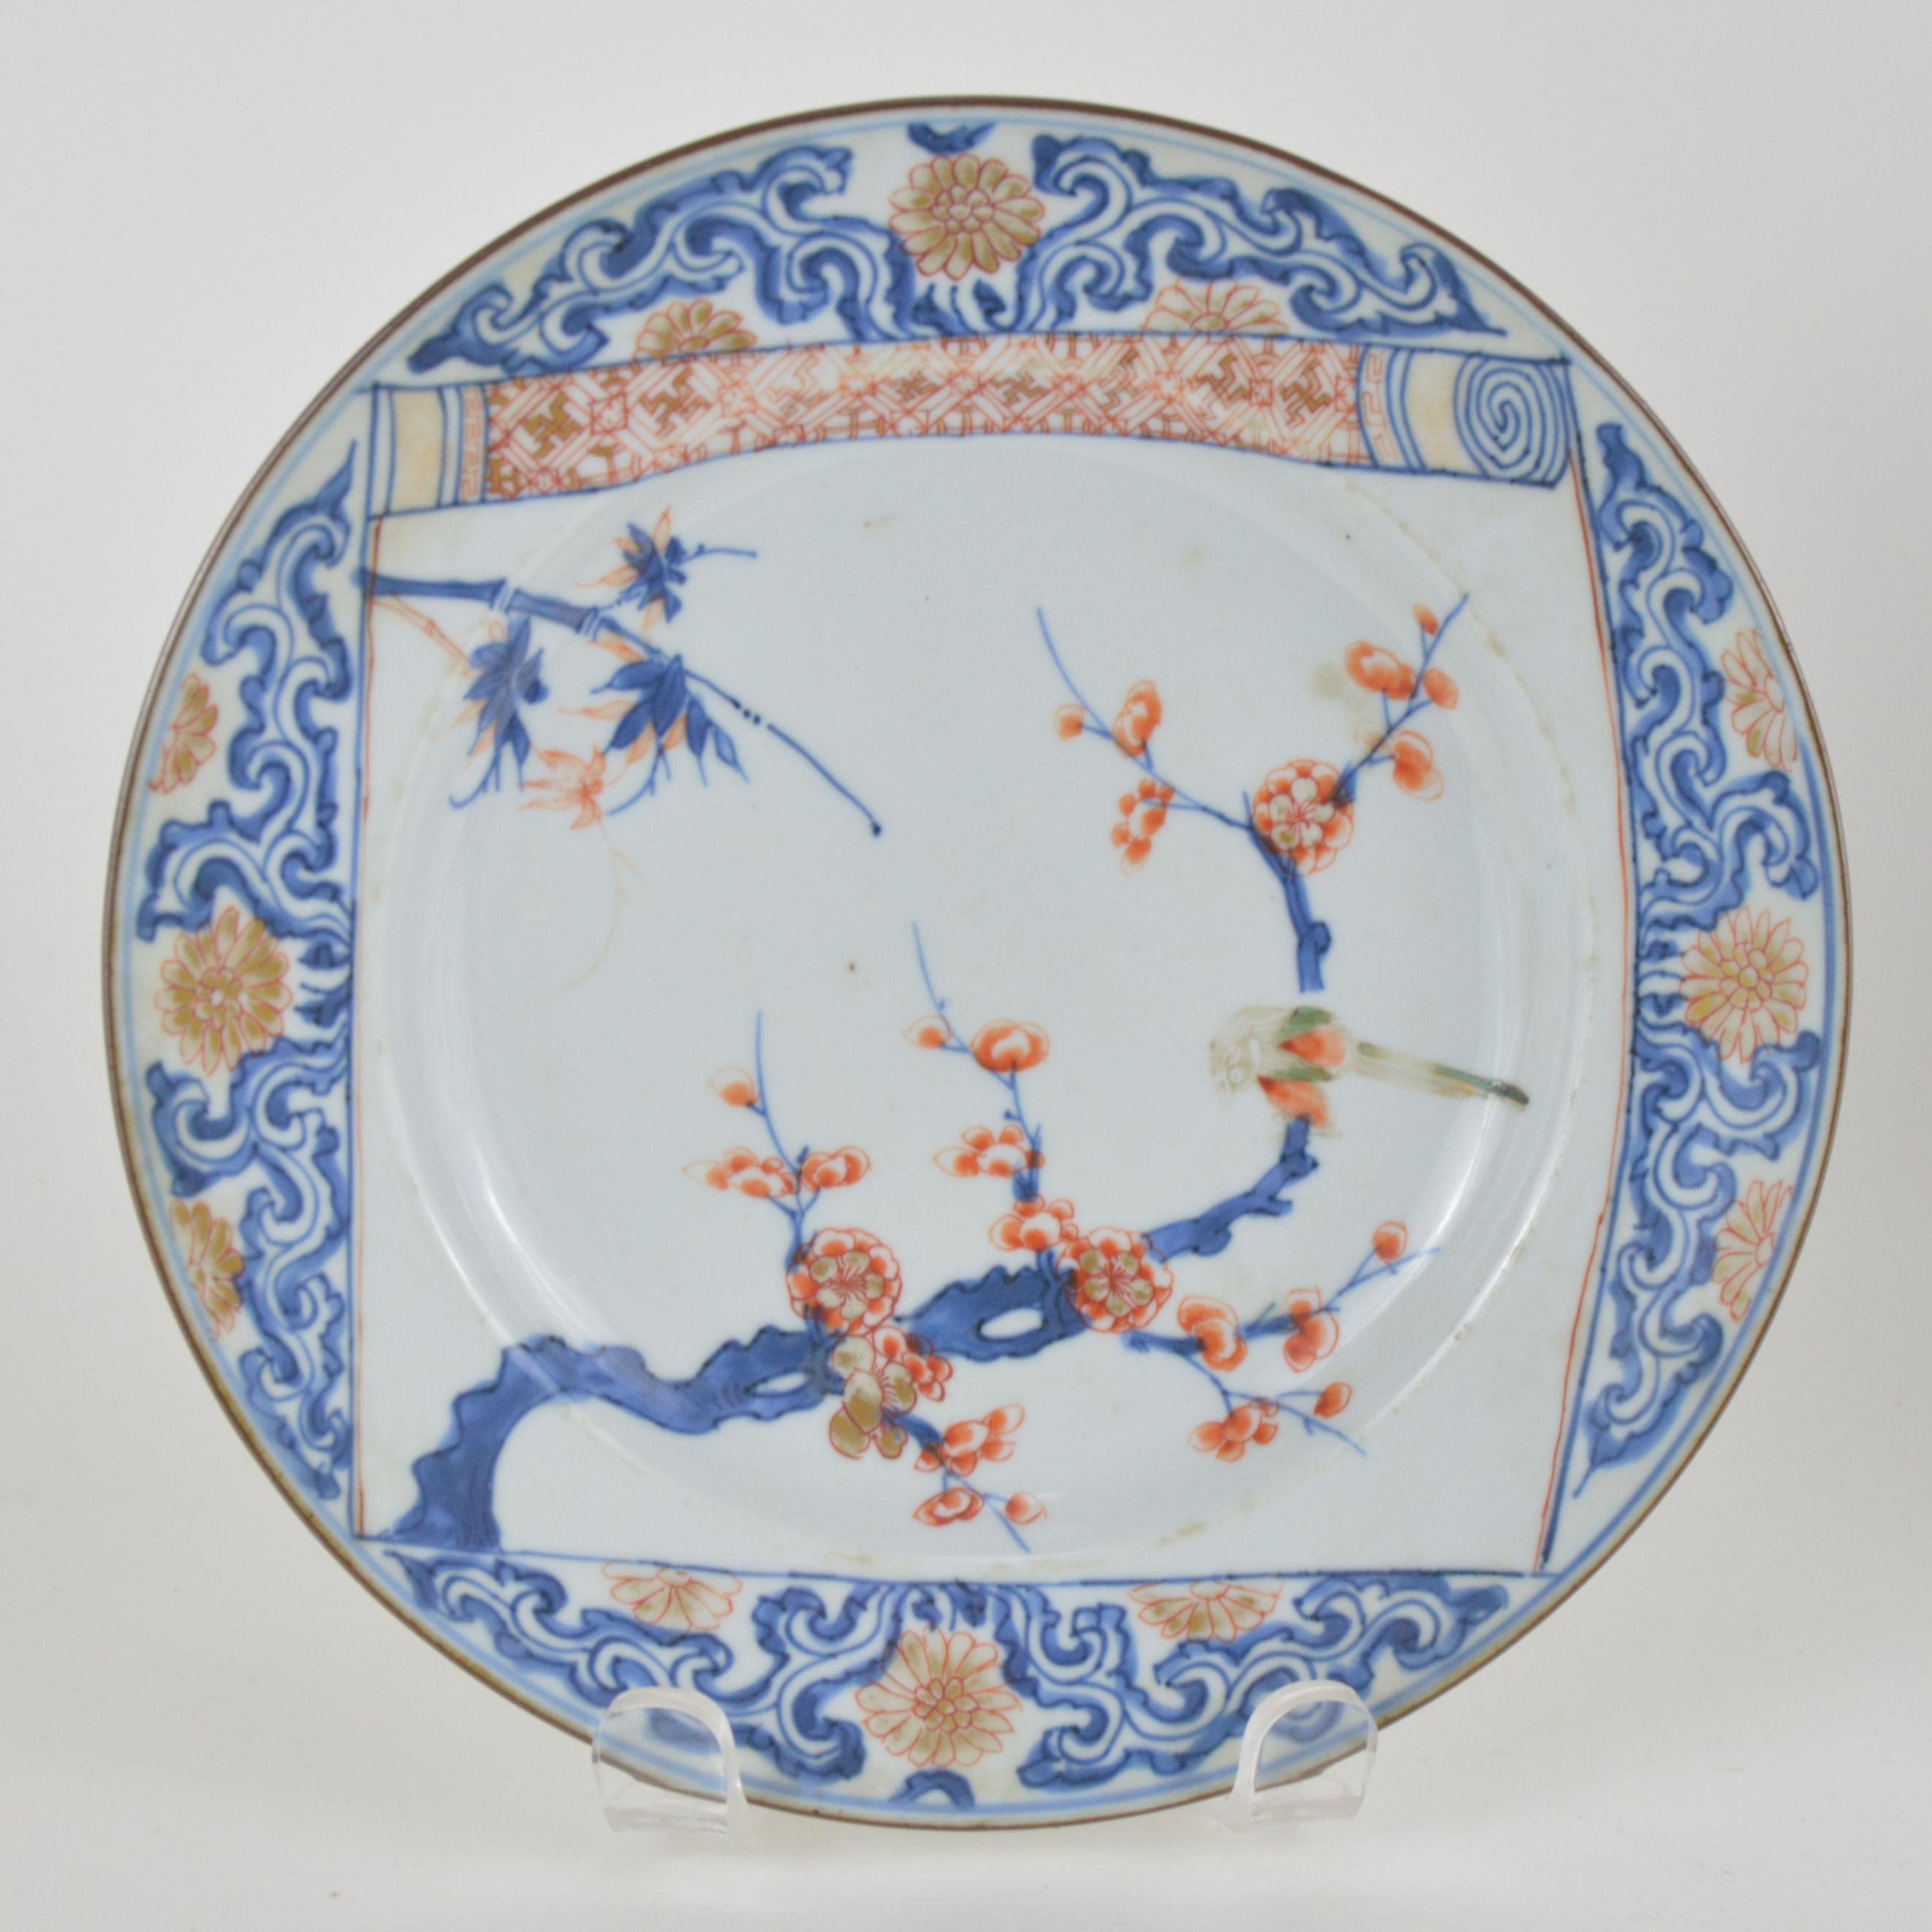 Pair of Chinese Imari plates, painted in underglaze-blue, red, and gold with various flowering branches, 18th century (Kanxi).